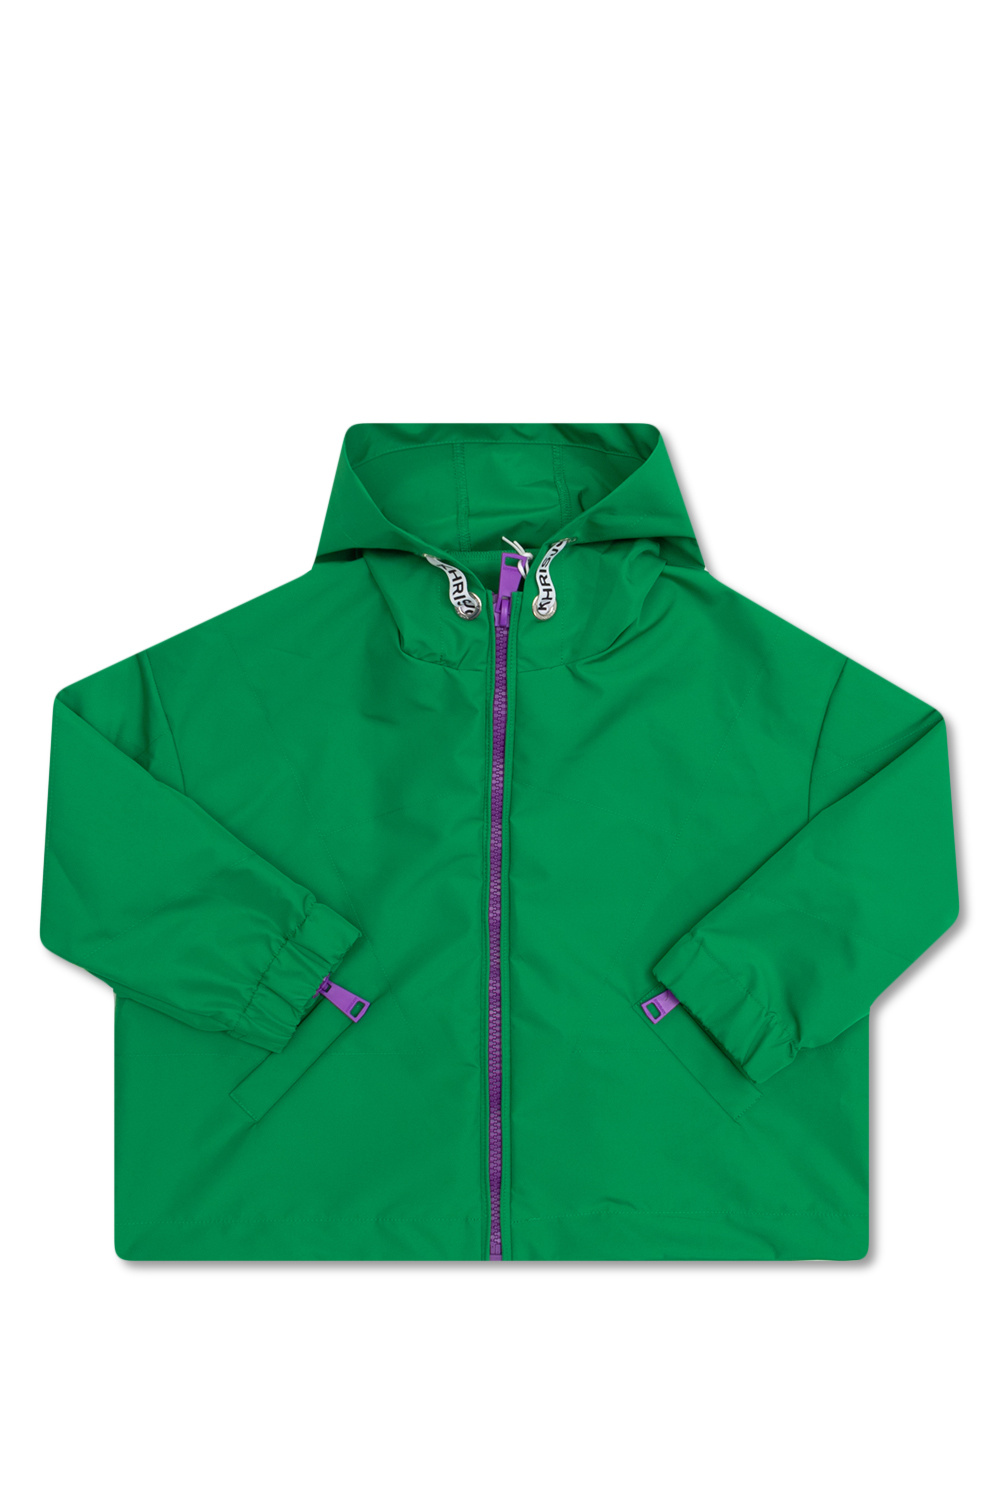 Khrisjoy Kids Anderson jacket with logo